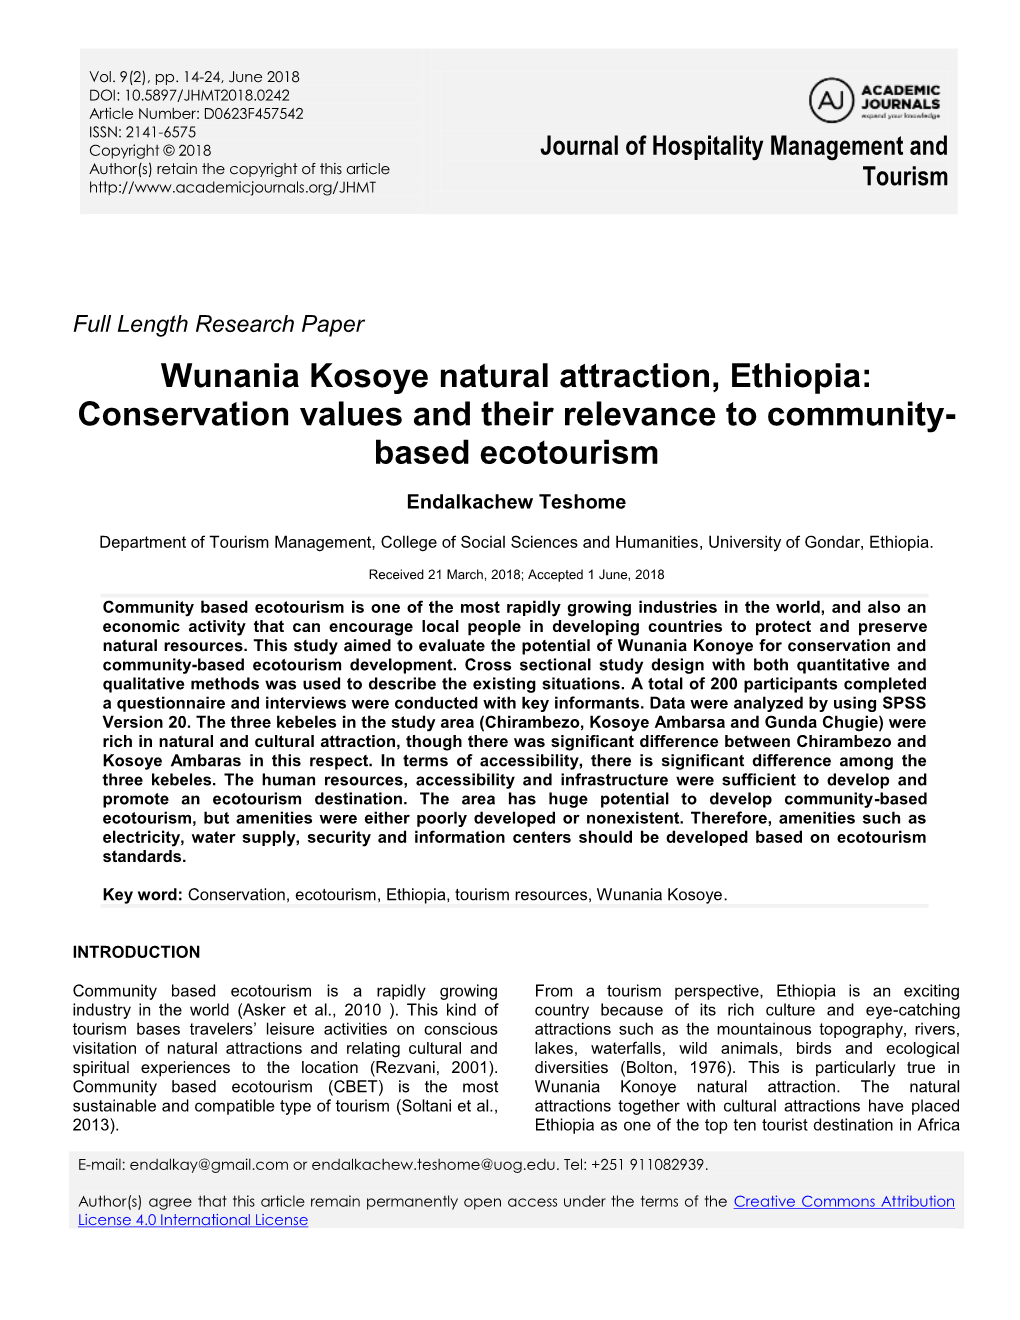 Wunania Kosoye Natural Attraction, Ethiopia: Conservation Values and Their Relevance to Community- Based Ecotourism